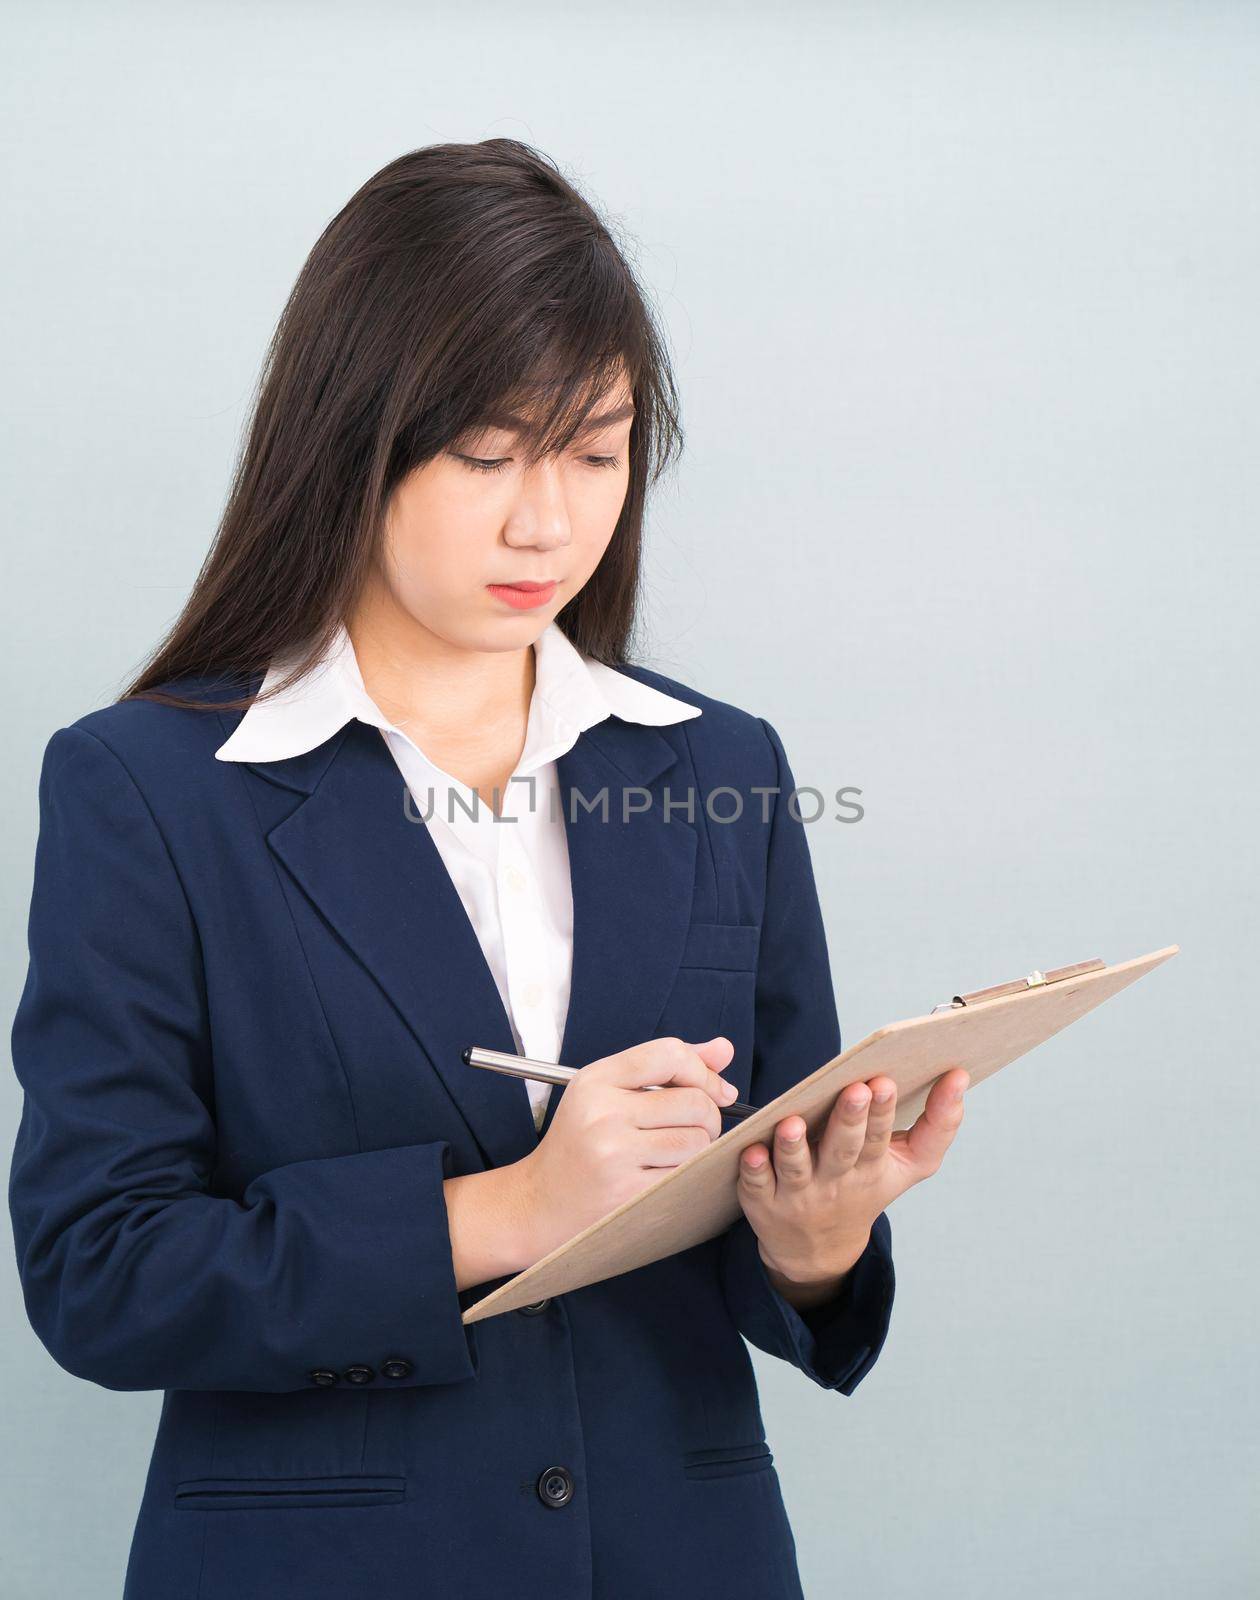 Portrait of Asian woman long hair and wearing suit  with clipboard and pen in hands thinking about success, isolated on white background